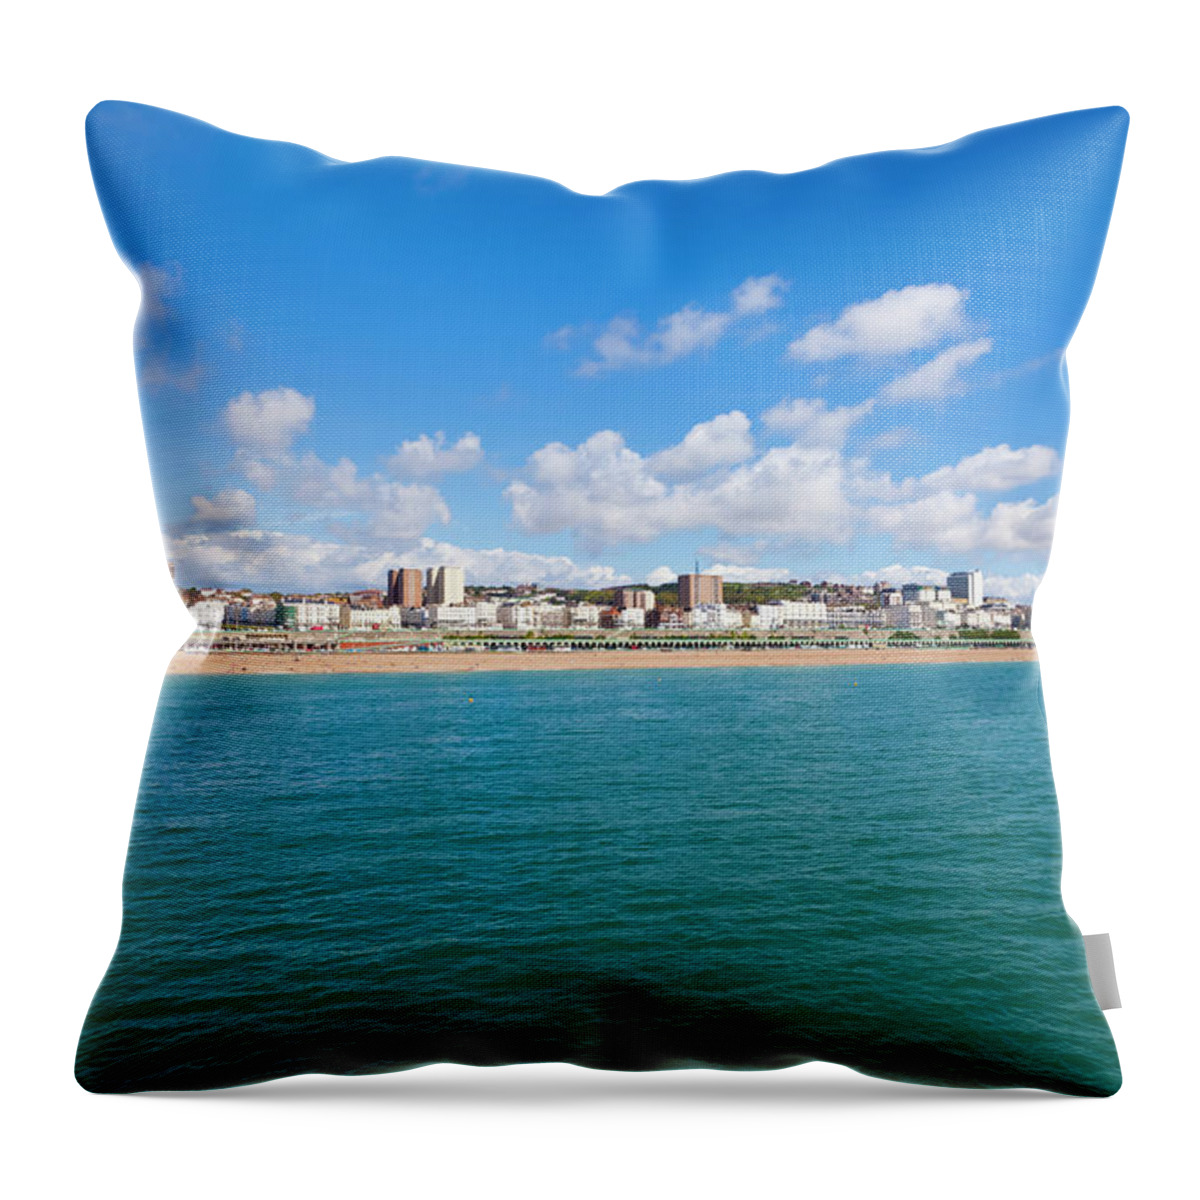 Sussex Throw Pillow featuring the photograph Cityscape Of Brighton, Sussex, England #2 by Werner Dieterich